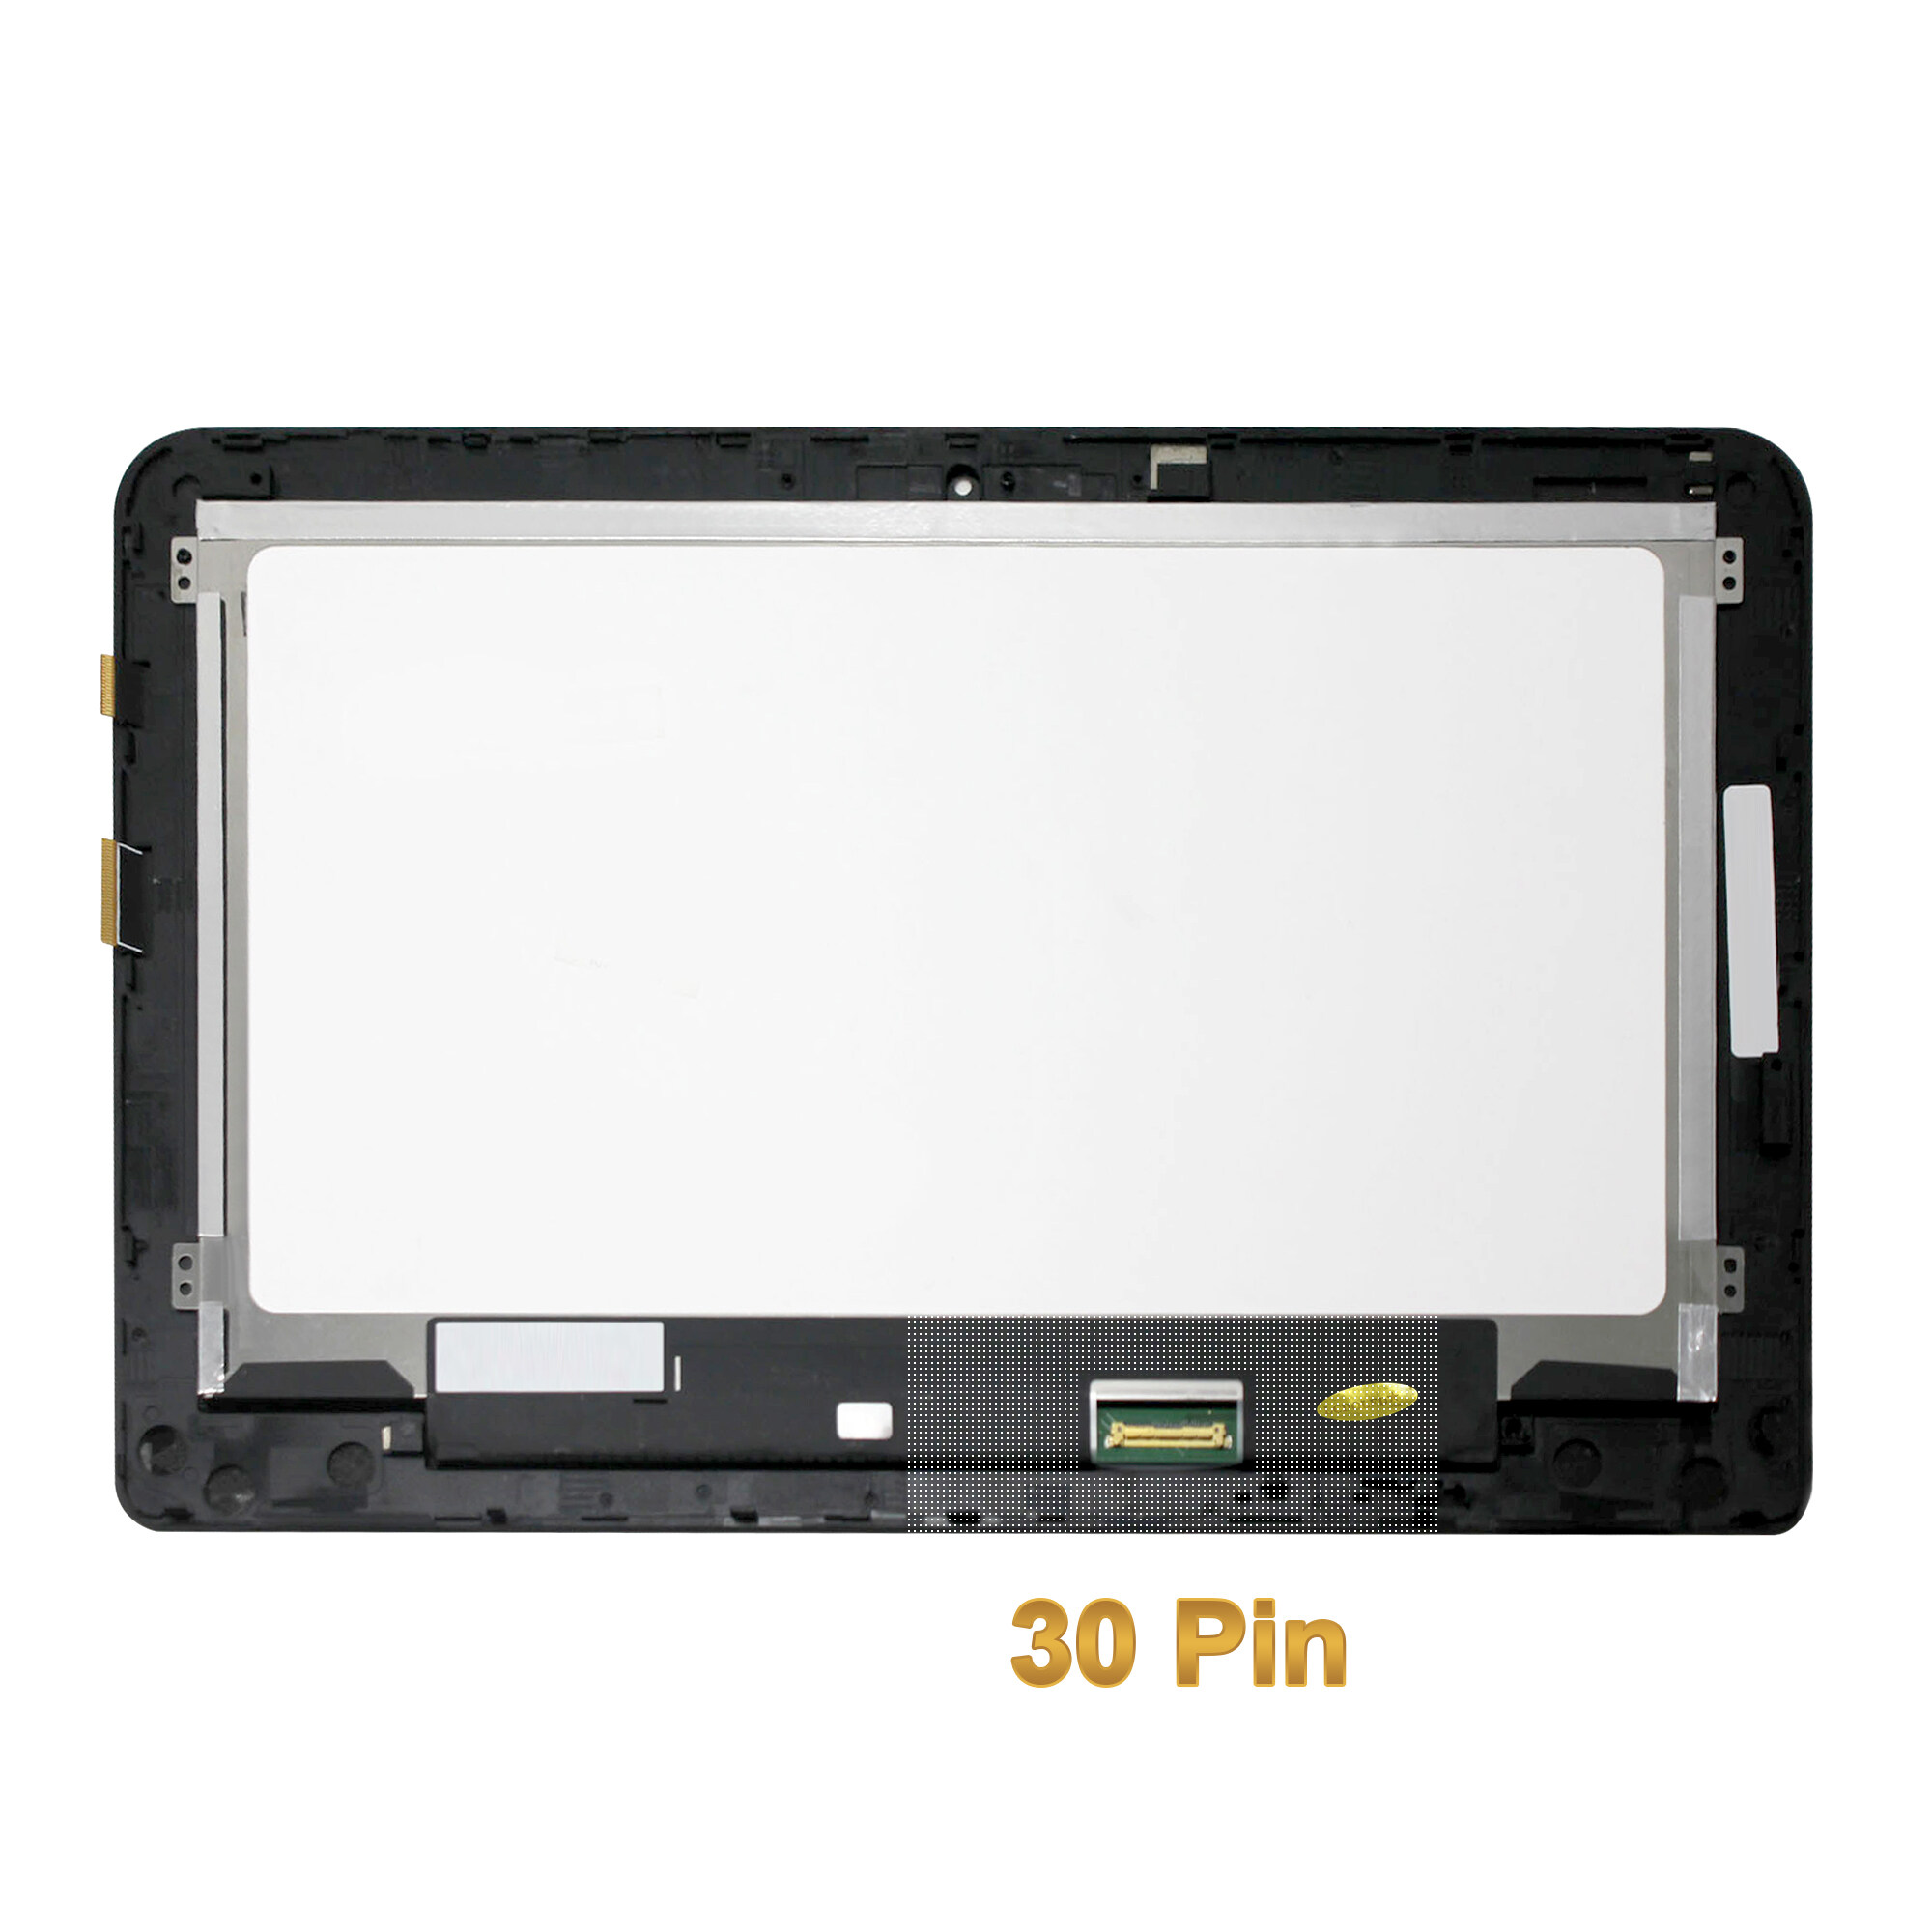 11.6" LED LCD Touch Screen Bezel Assembly New For HP Pavilion X360 11-k100 11-K137CL